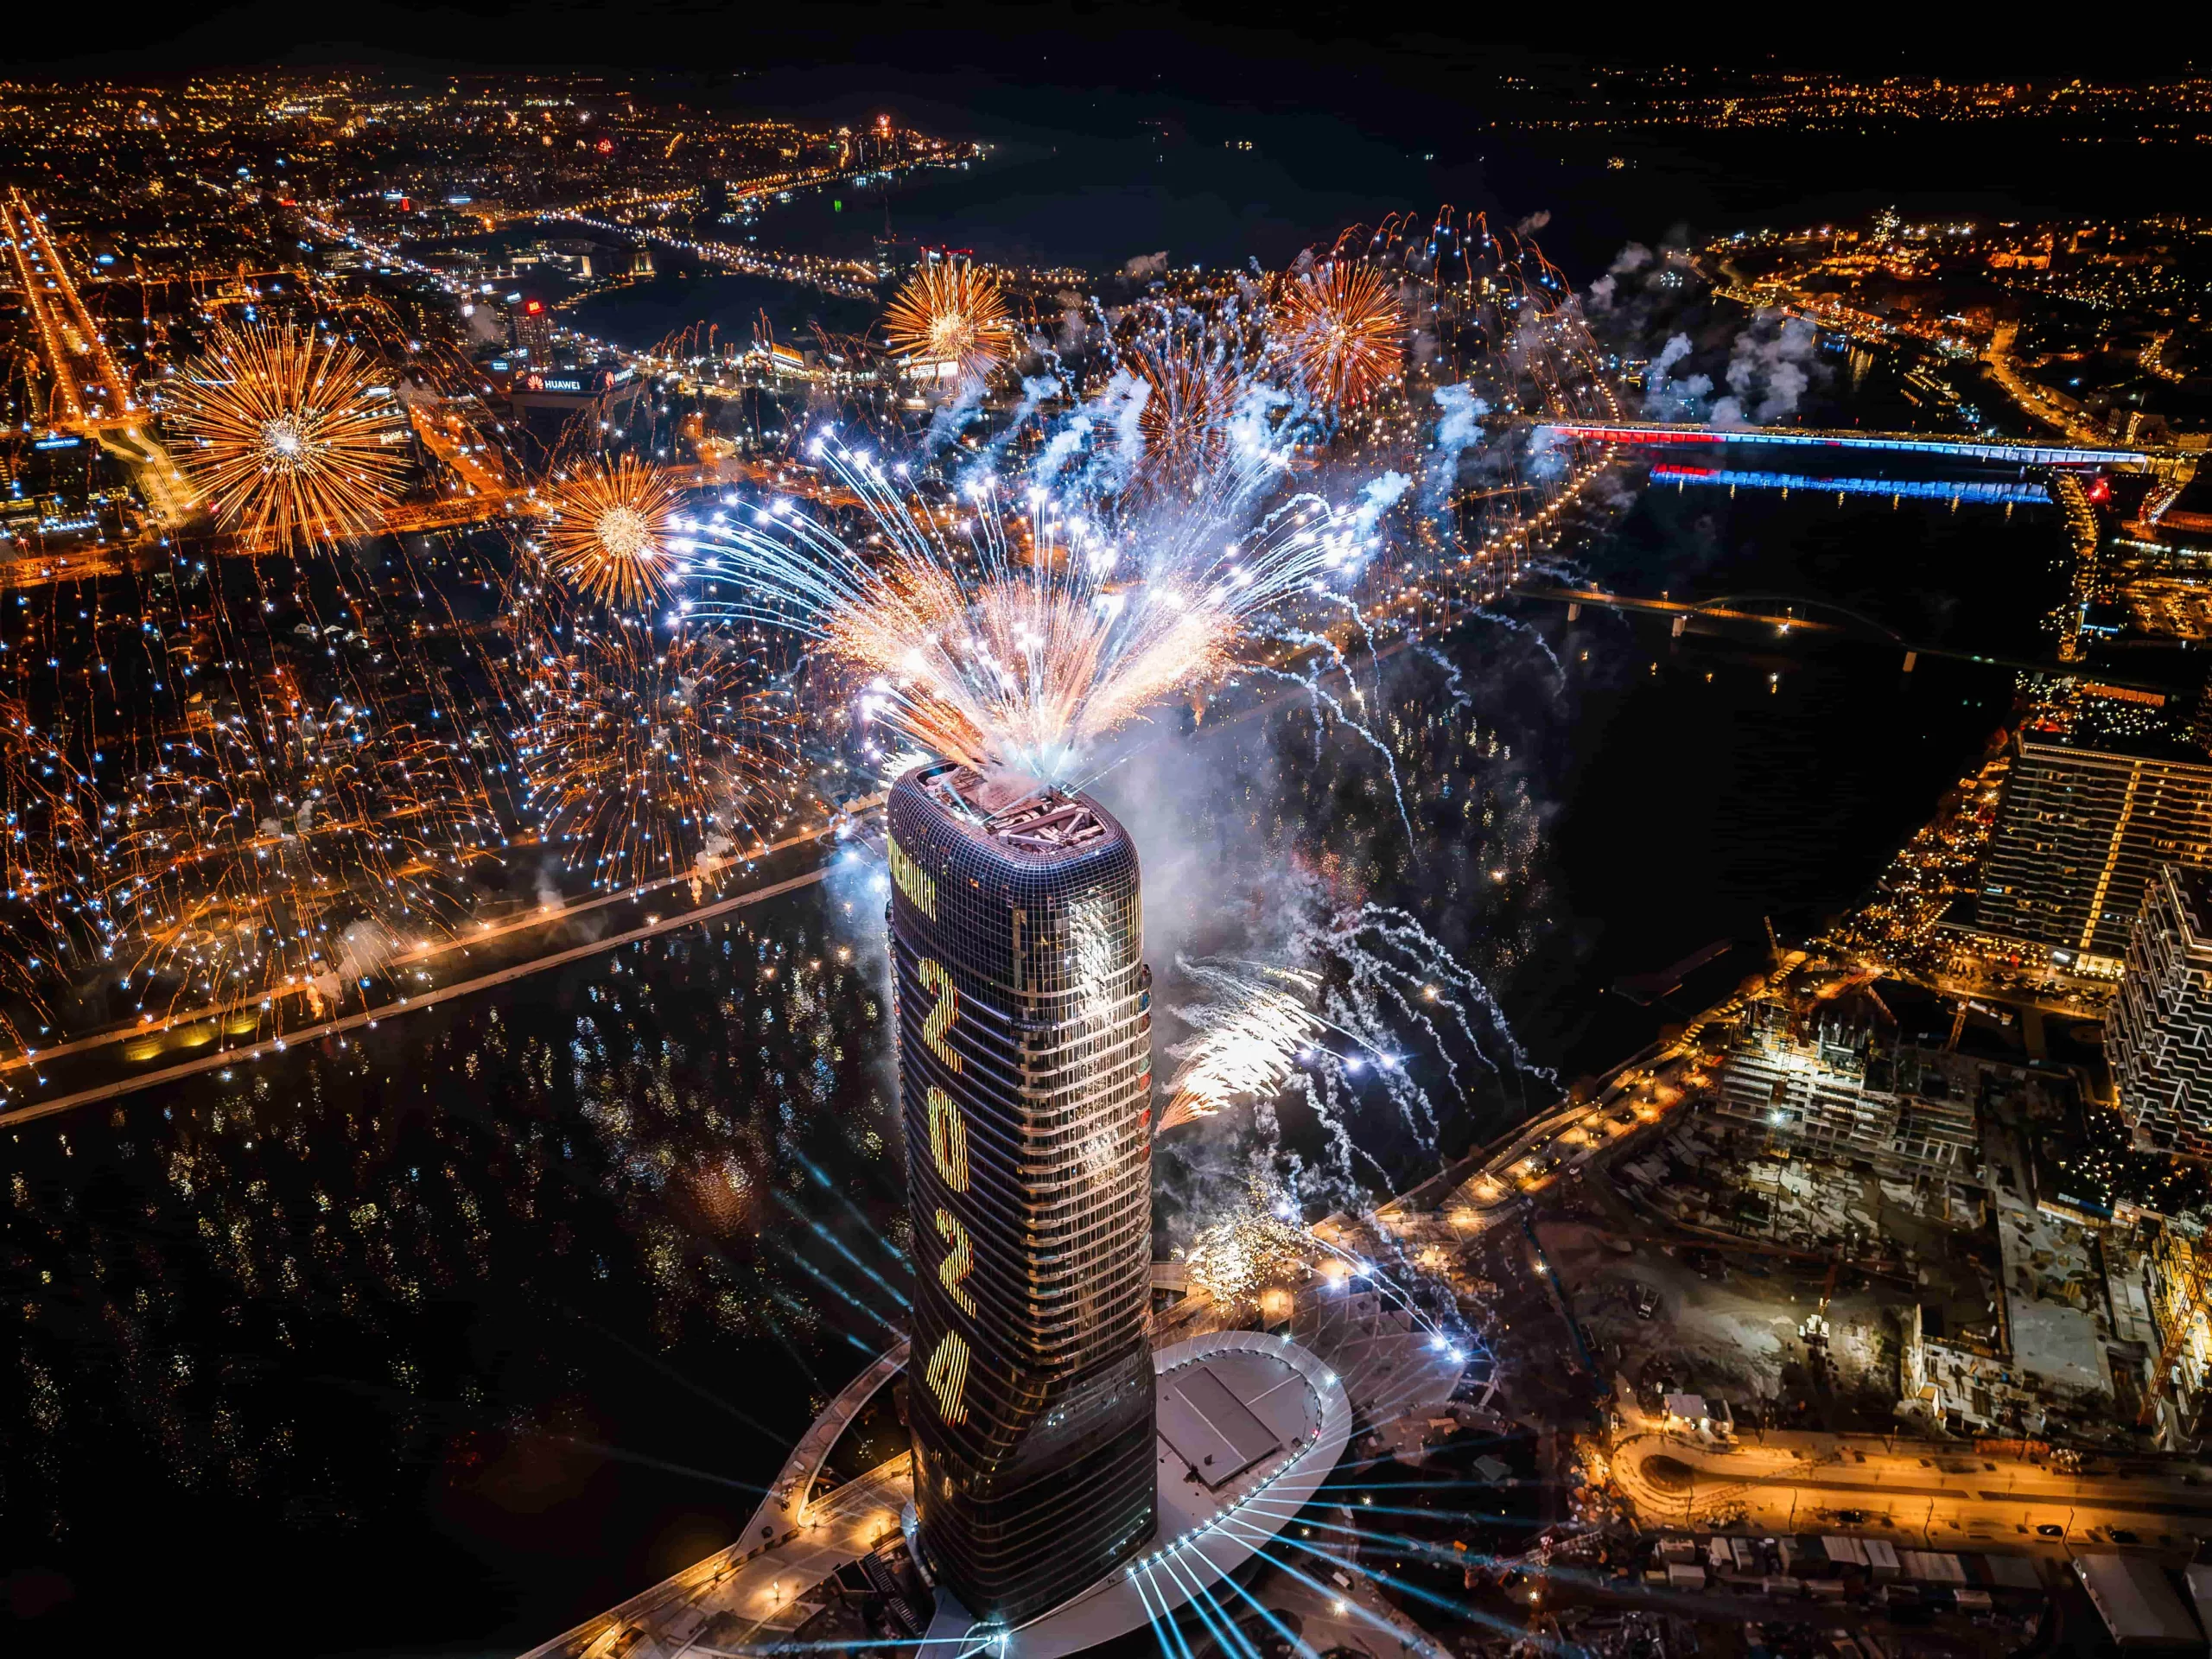 A new multimedia spectacle to welcome the Serbian New Year